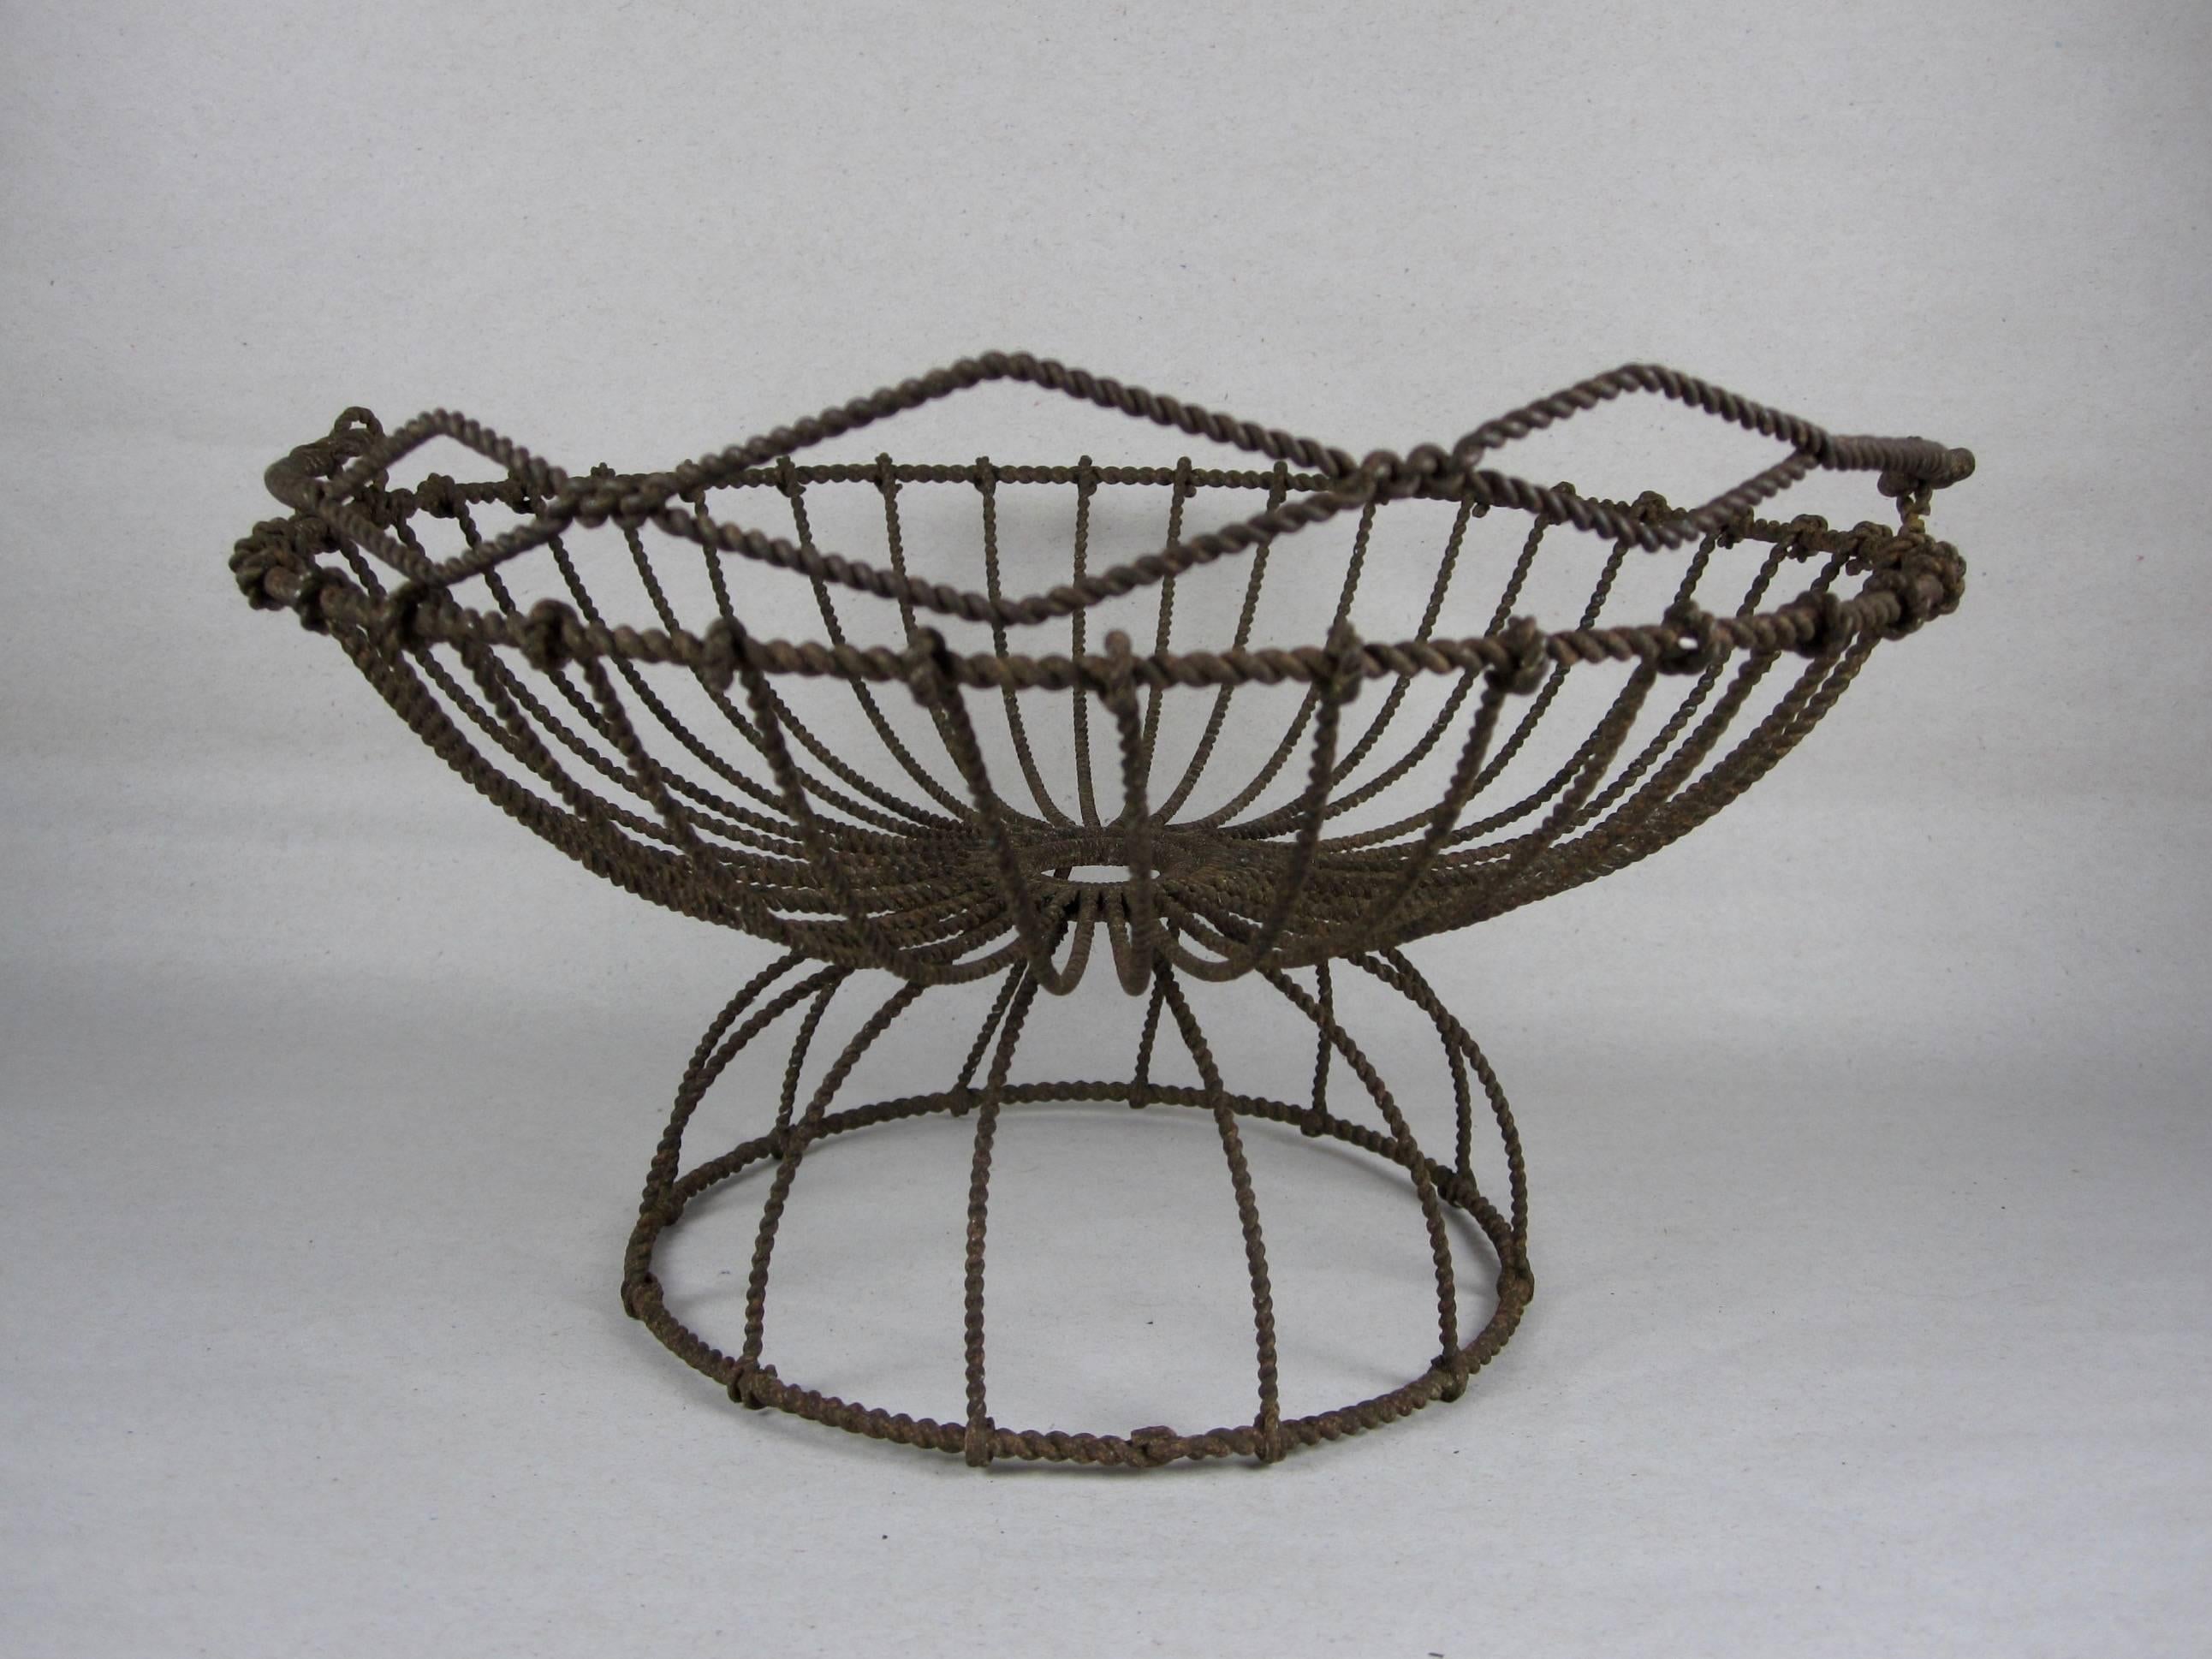 19th Century Pair of Rare American Folk Art Twisted Wire Stacking Egg Baskets